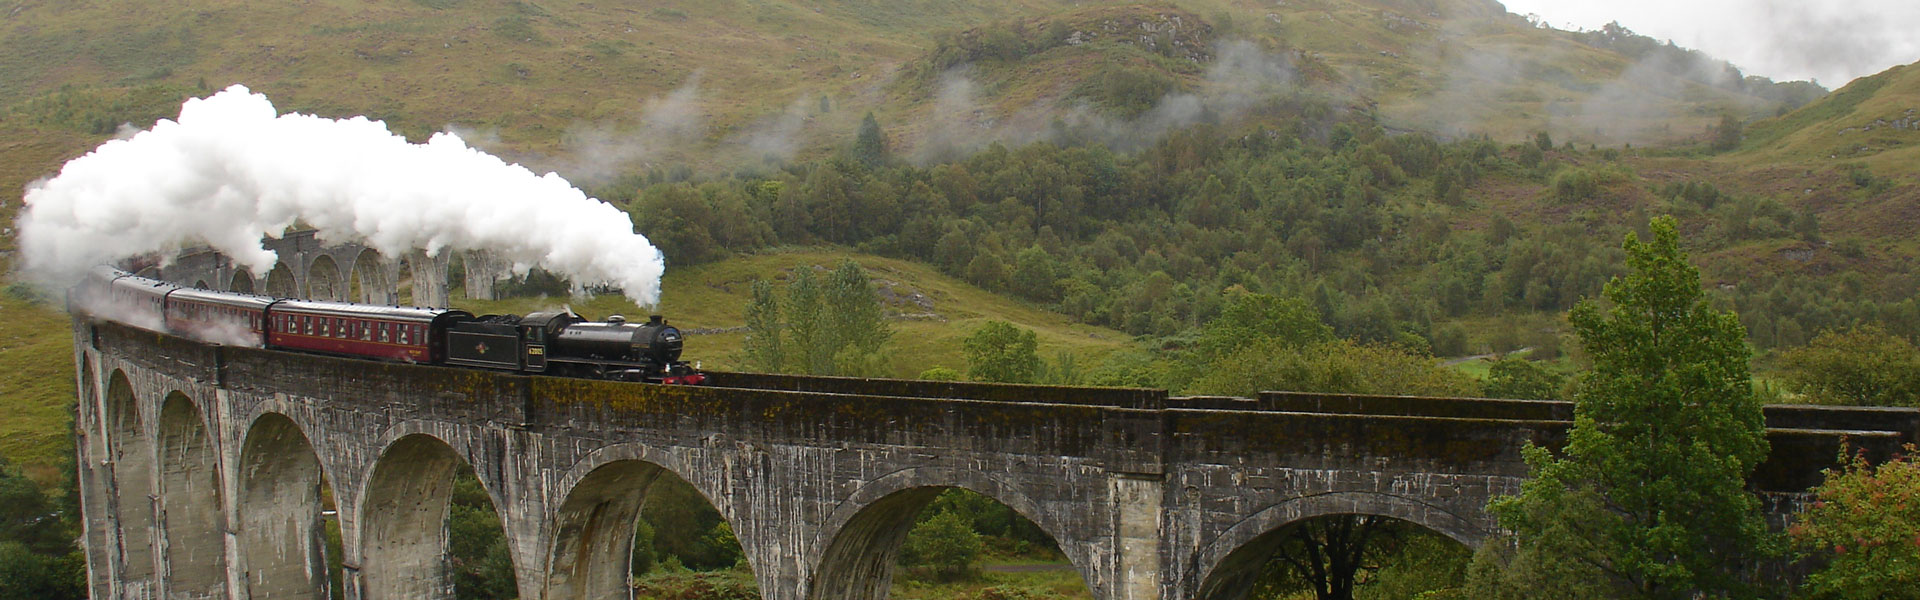 Discover old bridges in the Scottish countryside